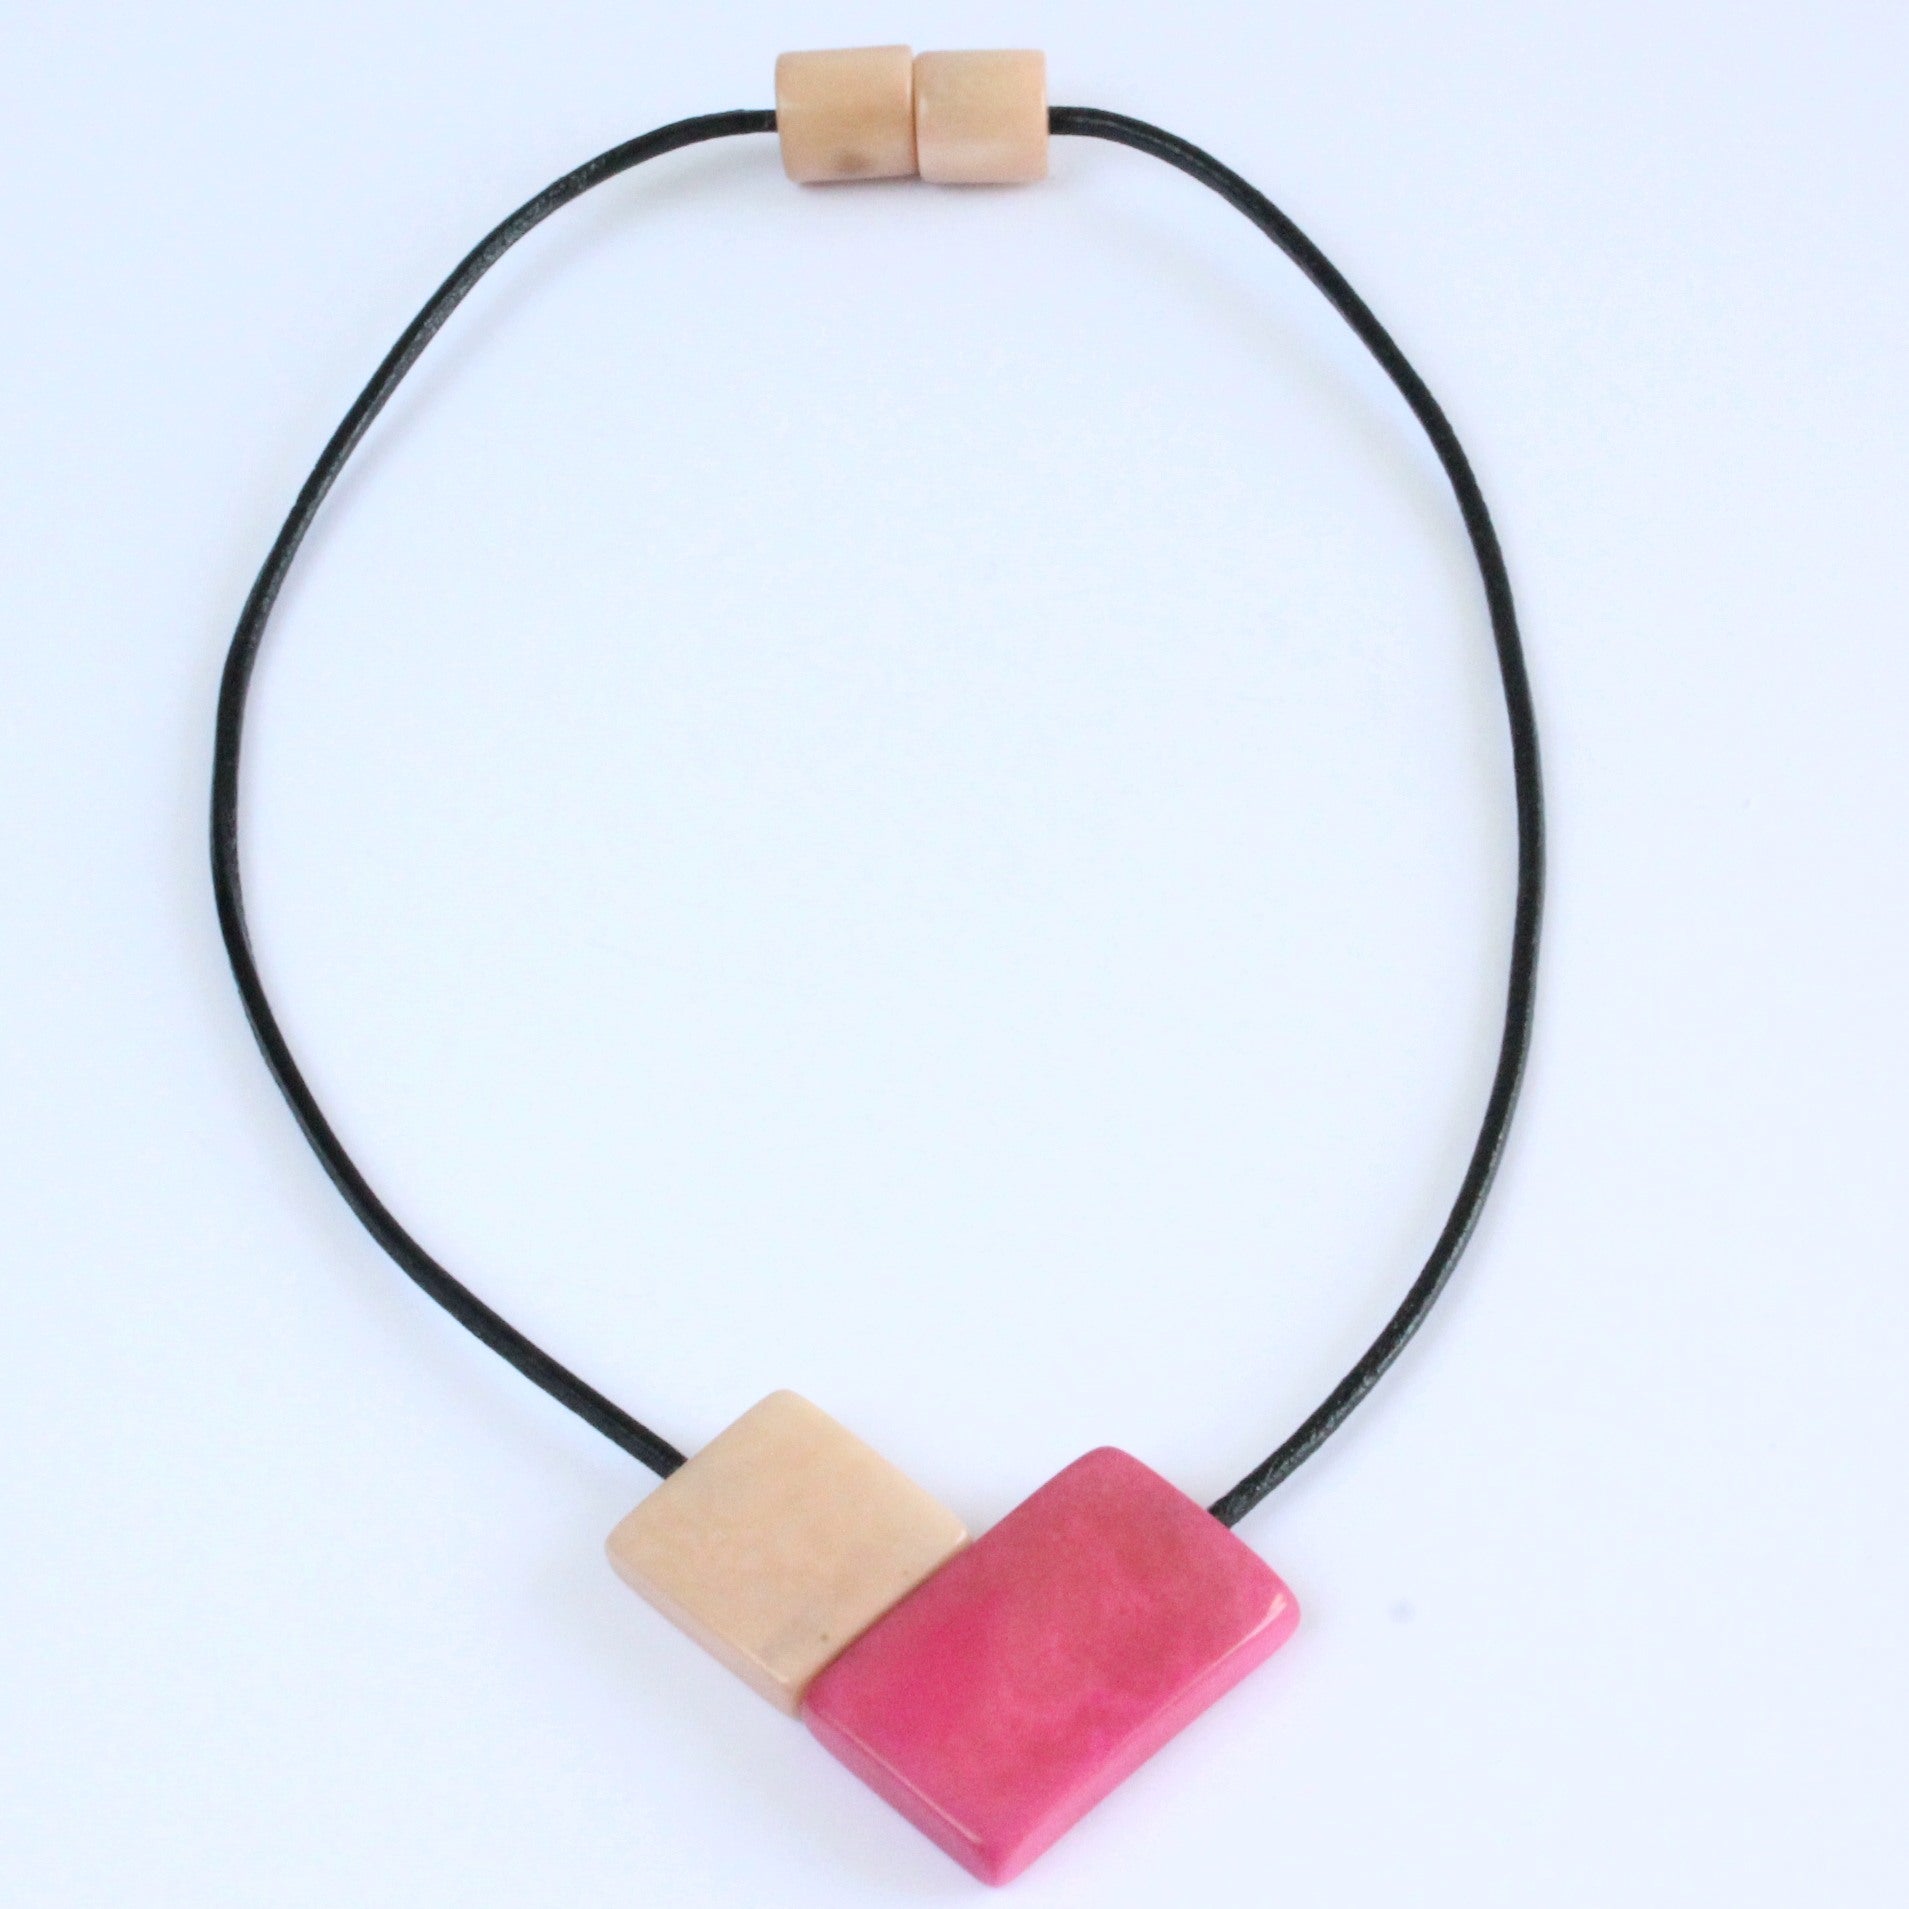 Handmade necklace, sustainable, tagua nut, magnetic lock, pink